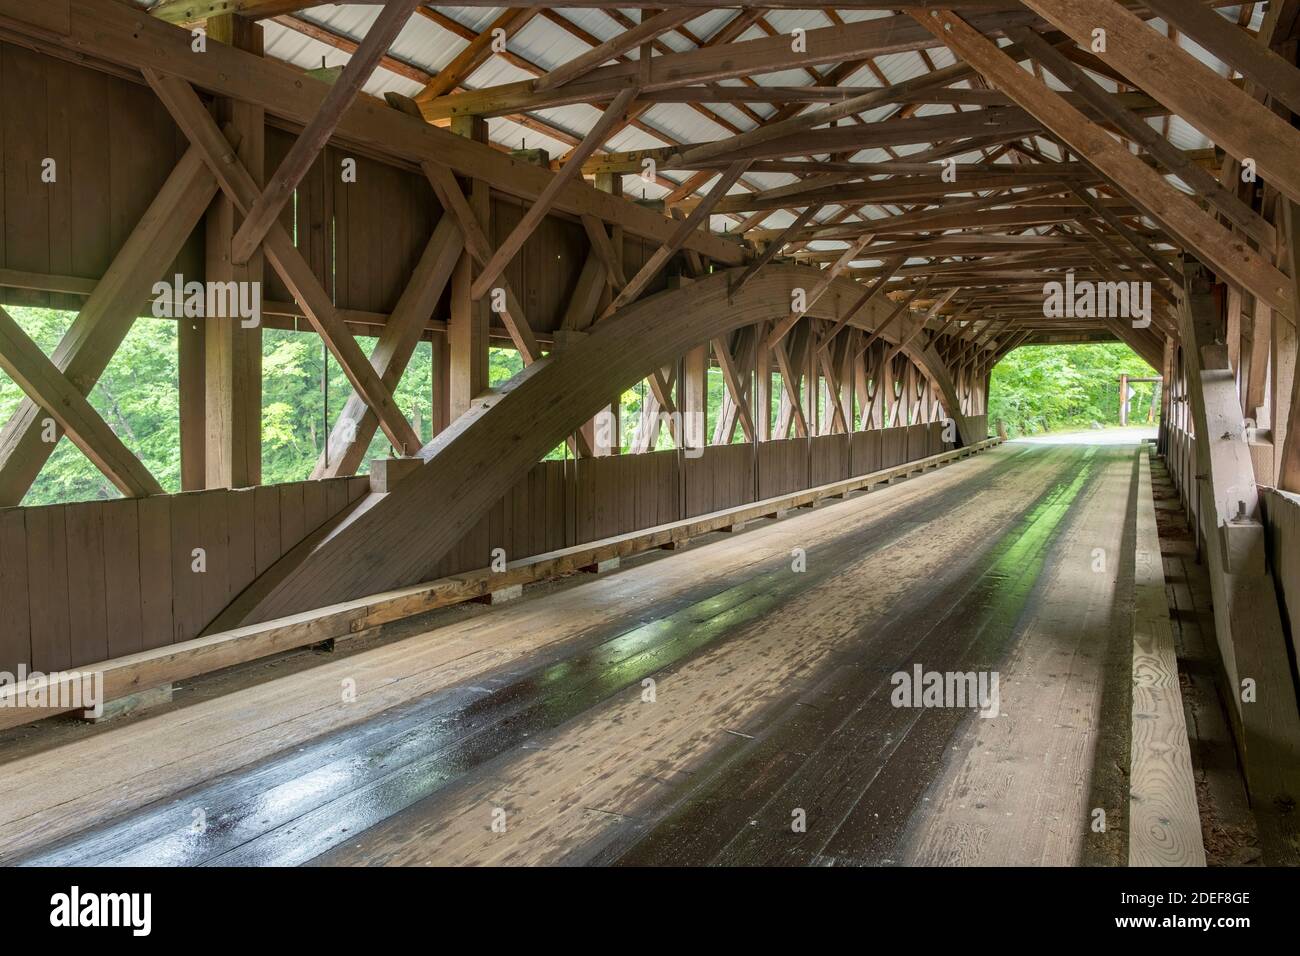 Inside Albany covered bridge, River Swift, White Mountains, NH Stock Photo